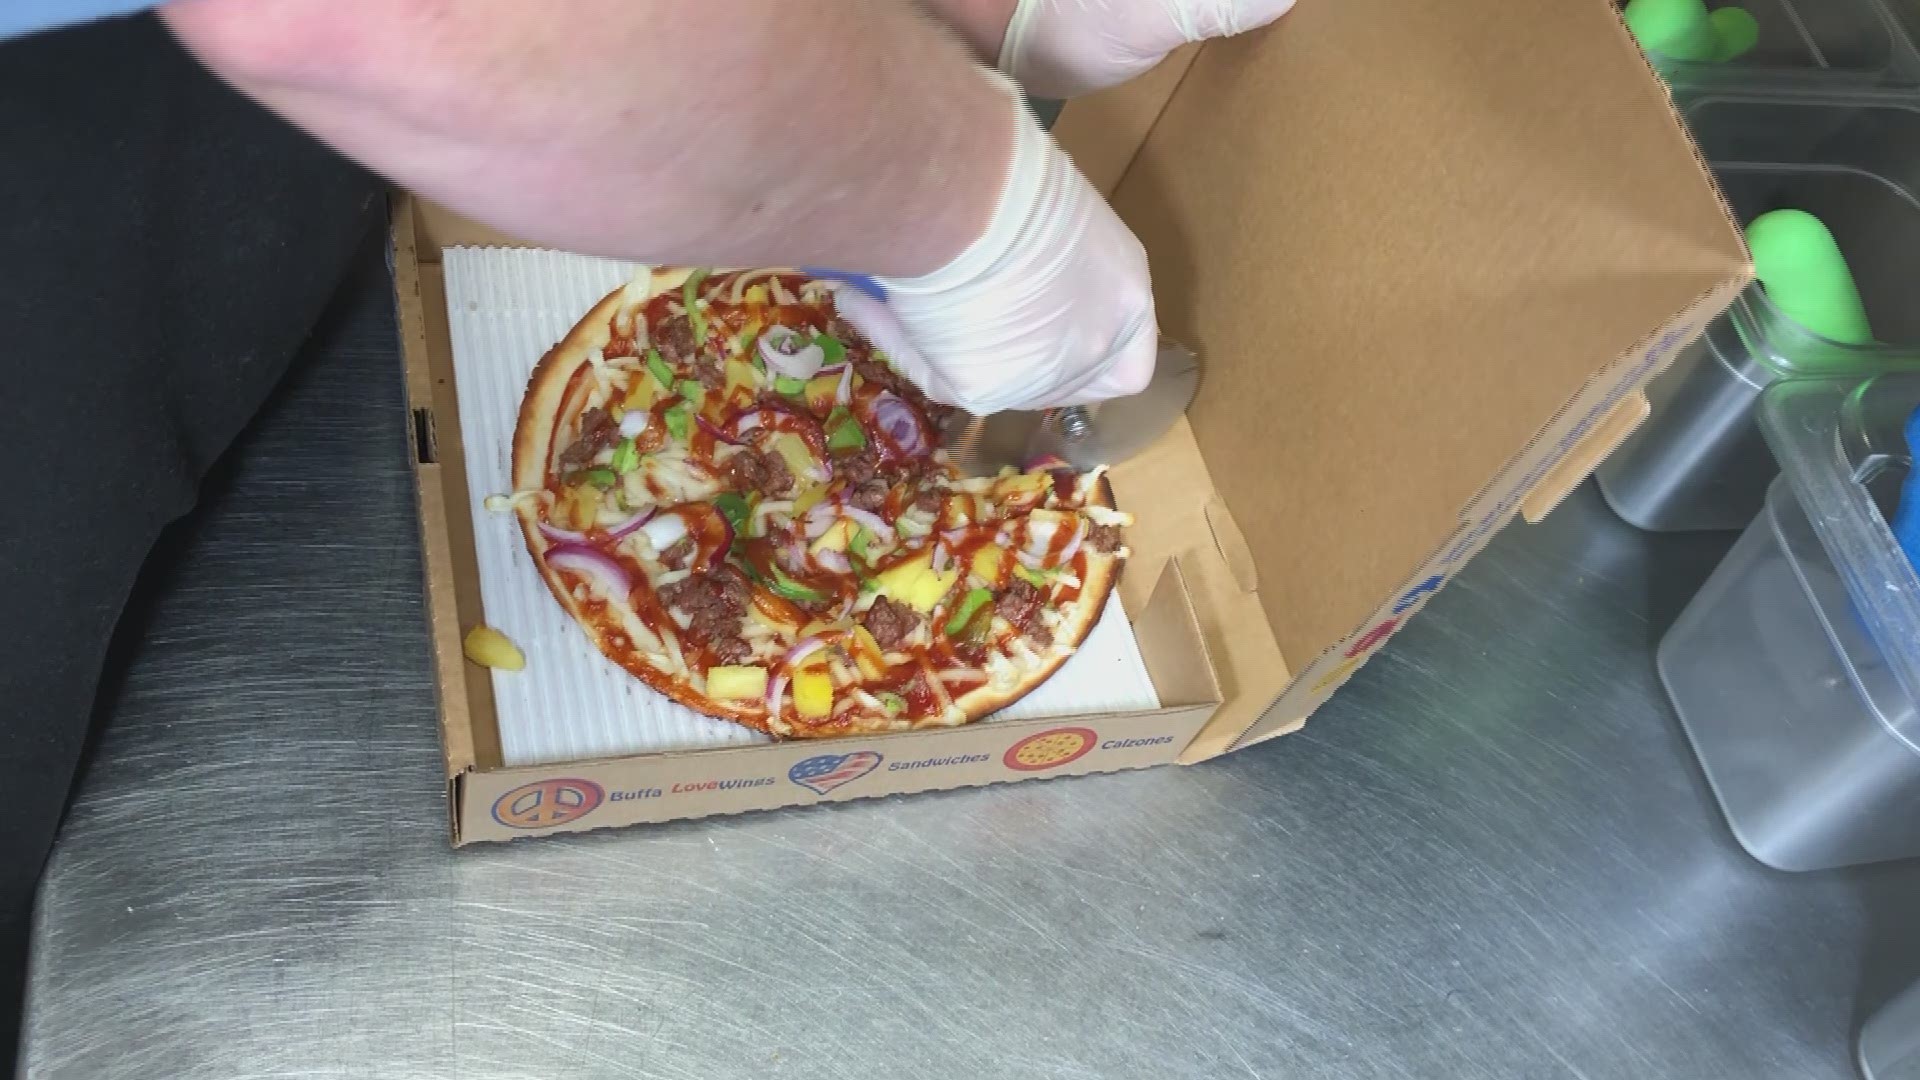 A local pizza chain has set the bar high, when it comes to vegan and gluten-free options.